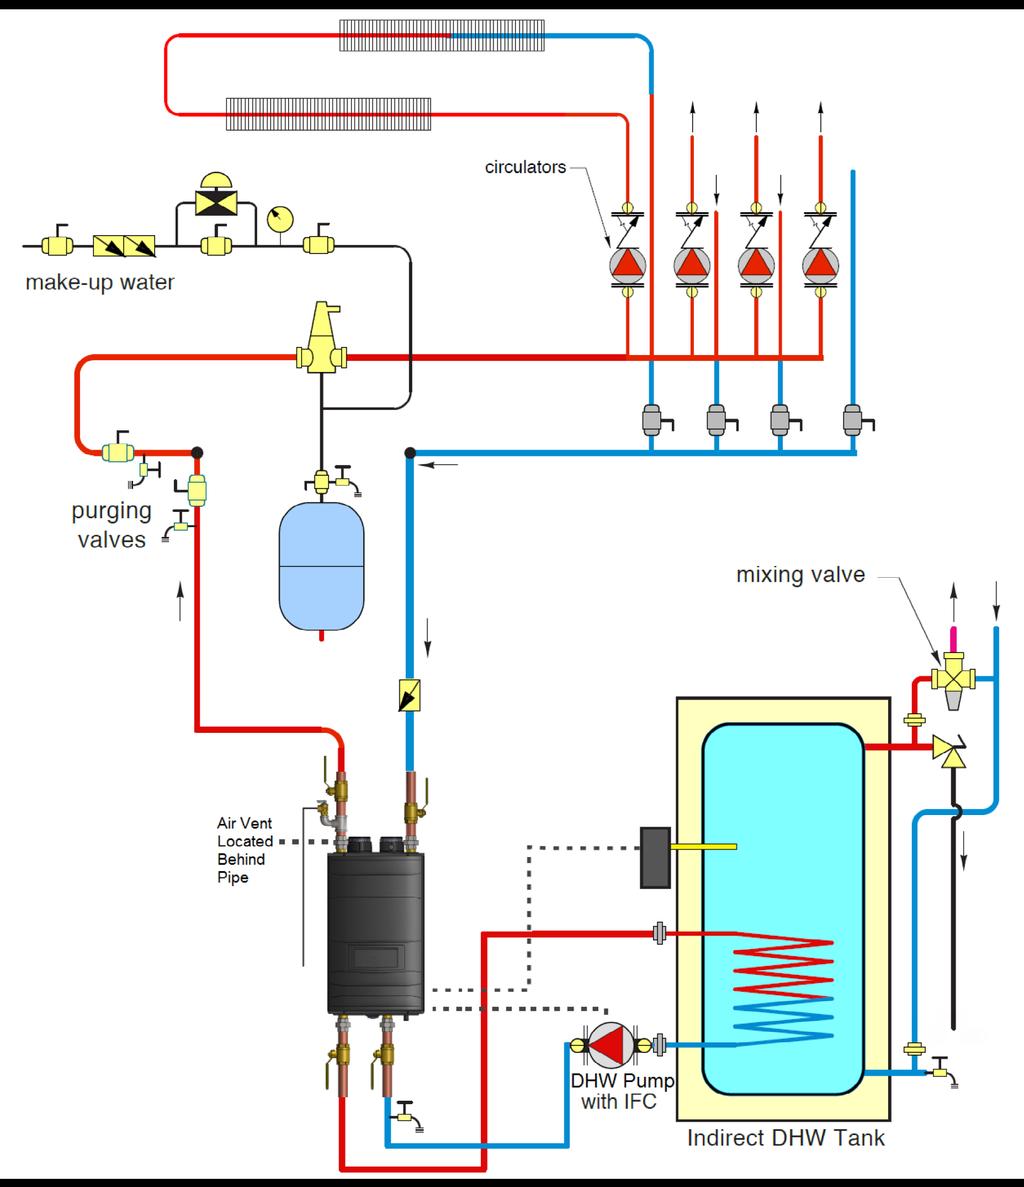 21 Figure 9 - Zoning with Pumps and Indirect Water Heating - Direct Piping NOTES: 1. This drawing is meant to show system piping concept only.